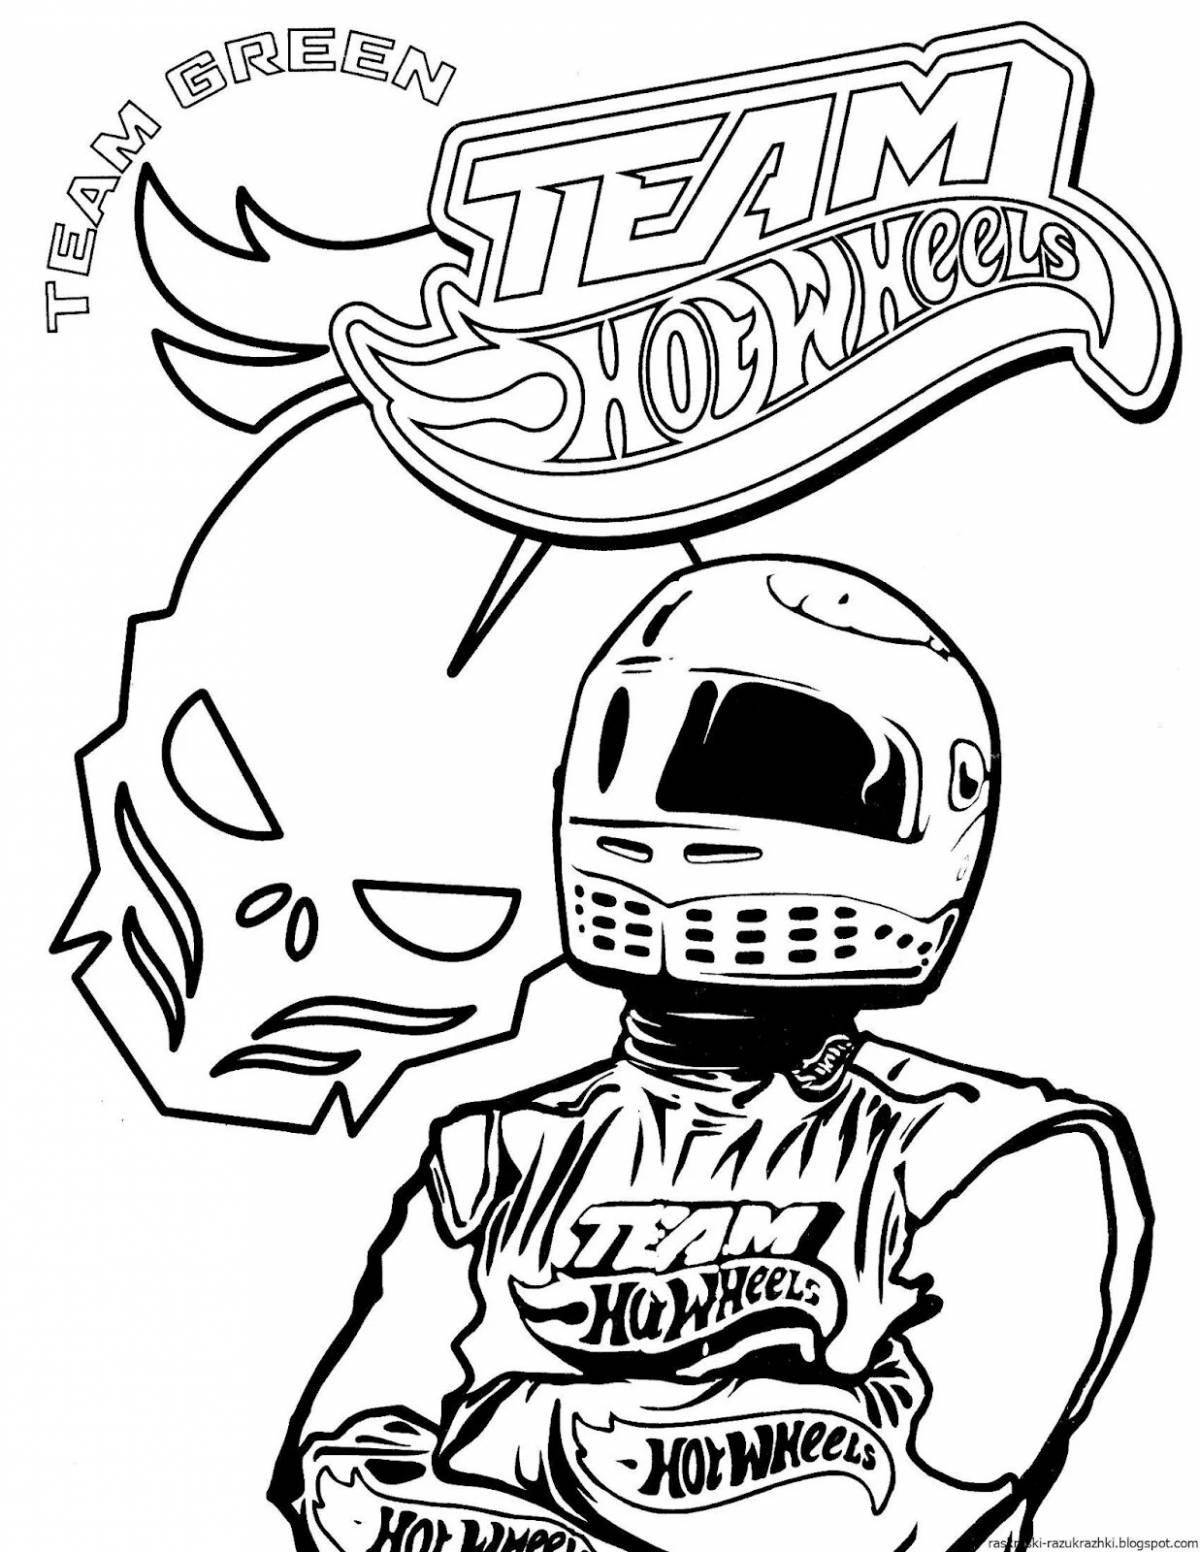 Dazzling hot wheels motorcycle coloring page